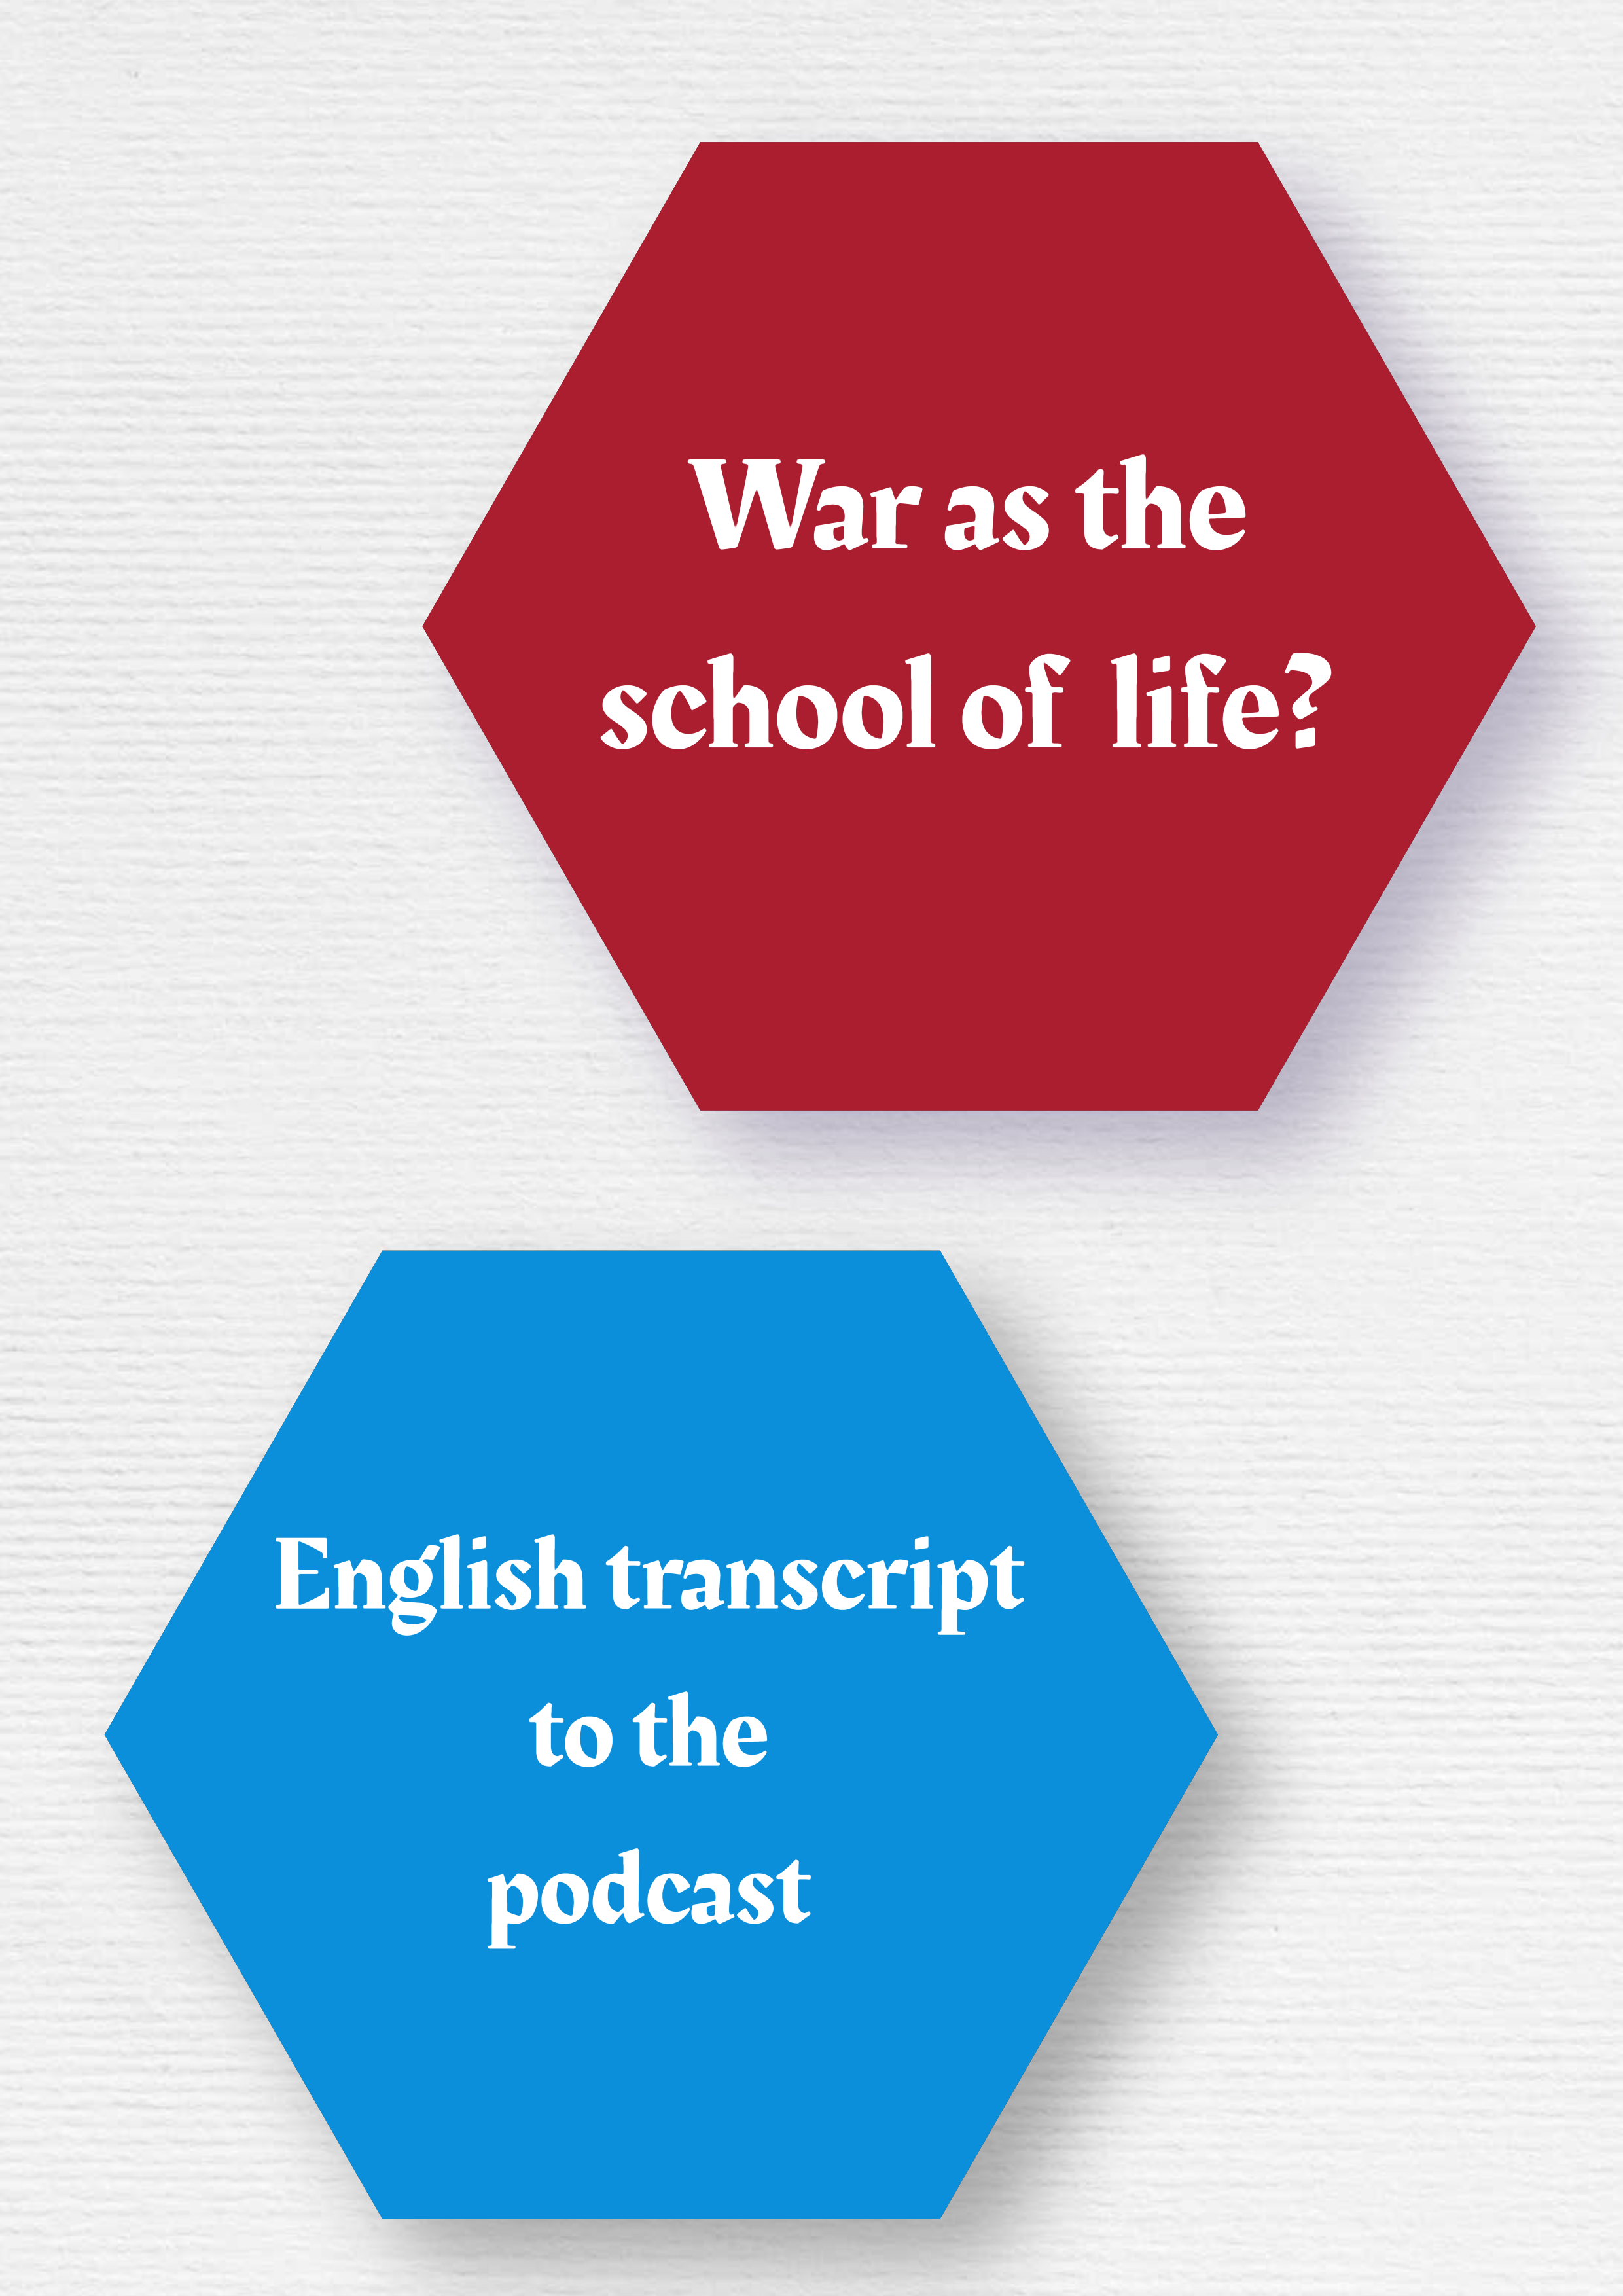 War as the school of life?